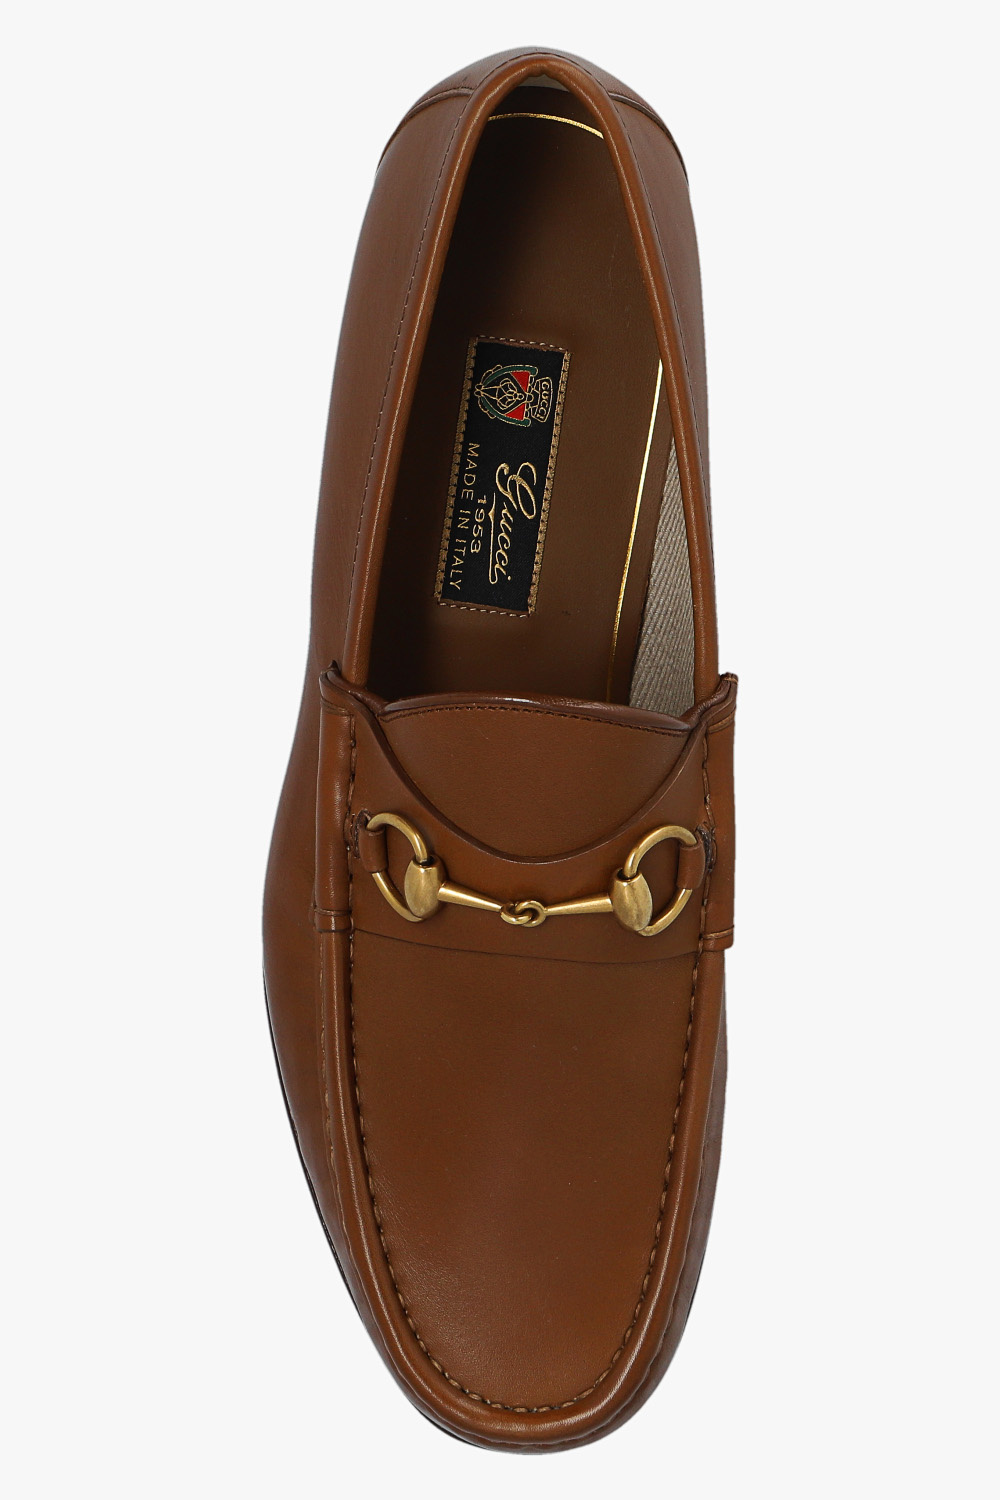 Gucci ‘1953 POLO’ leather loafers